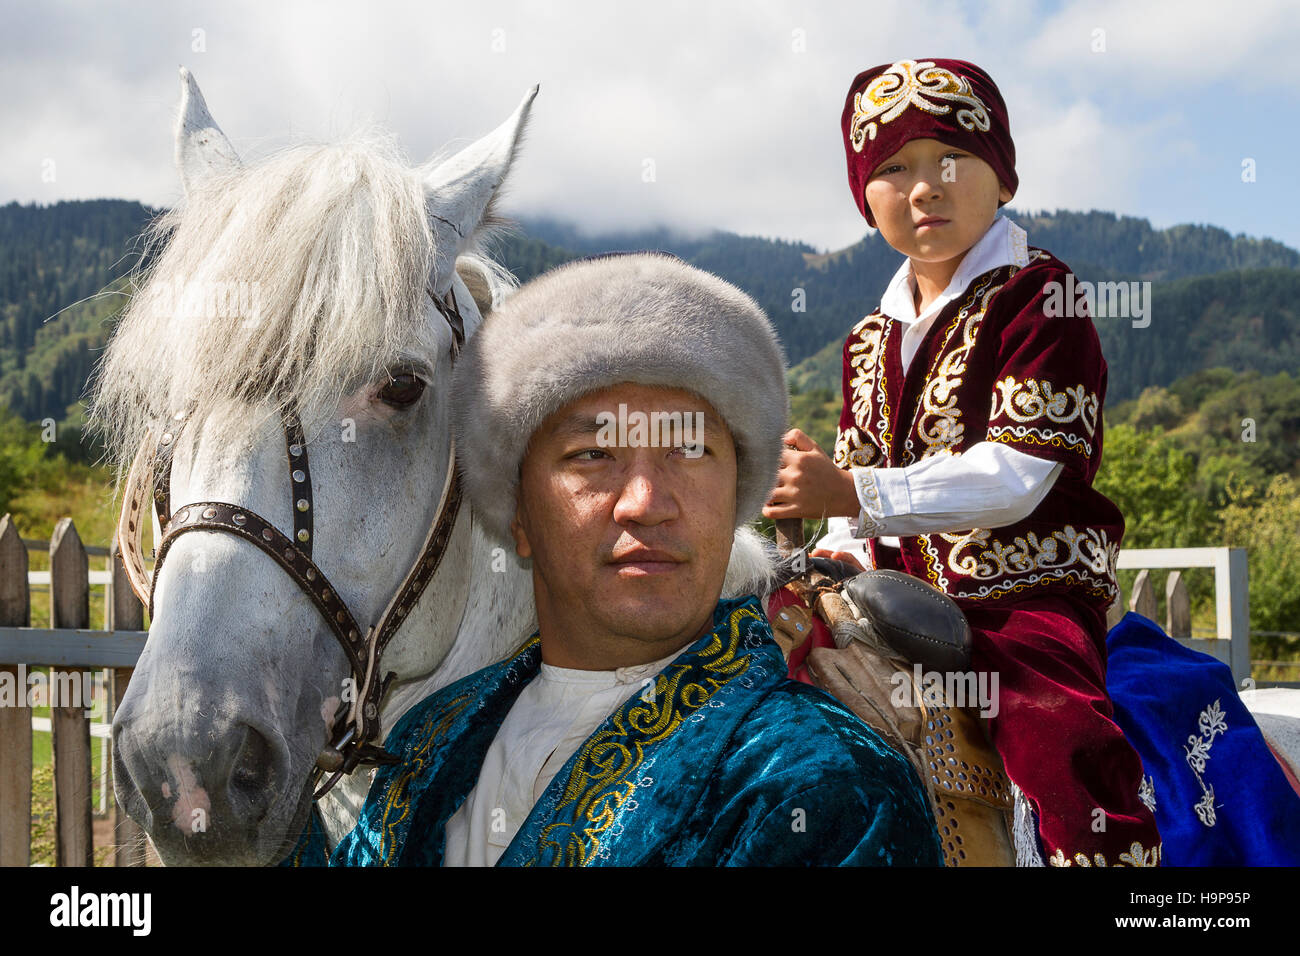 Kazakh father and son on his horse in traditional dresses at Kazakh show of national games in Almaty, Kazakhstan Stock Photo